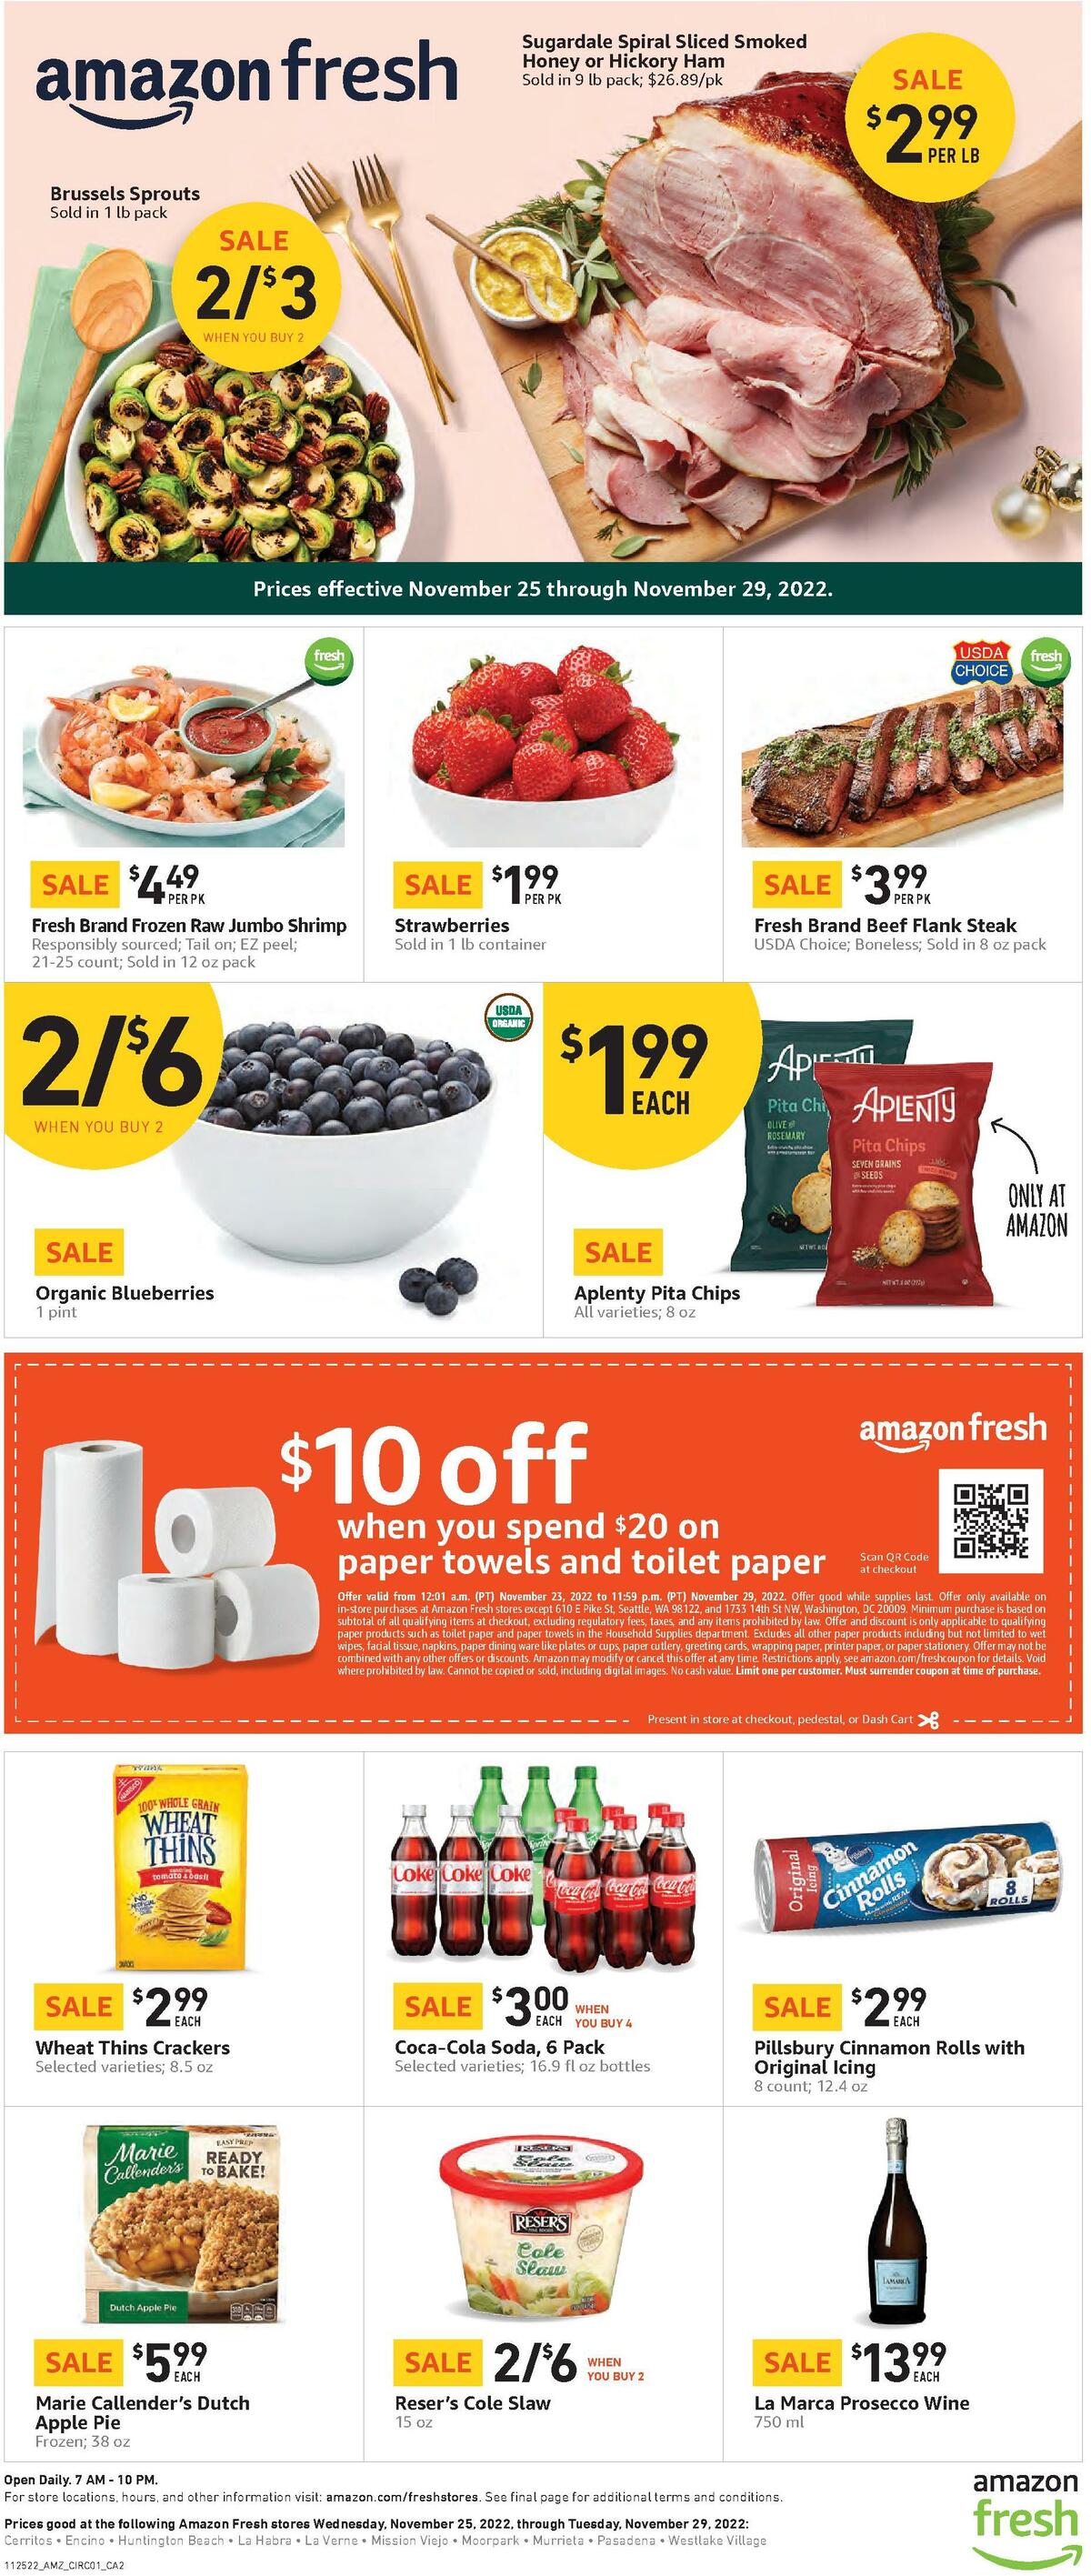 Amazon Fresh Weekly Sale Ads from November 25